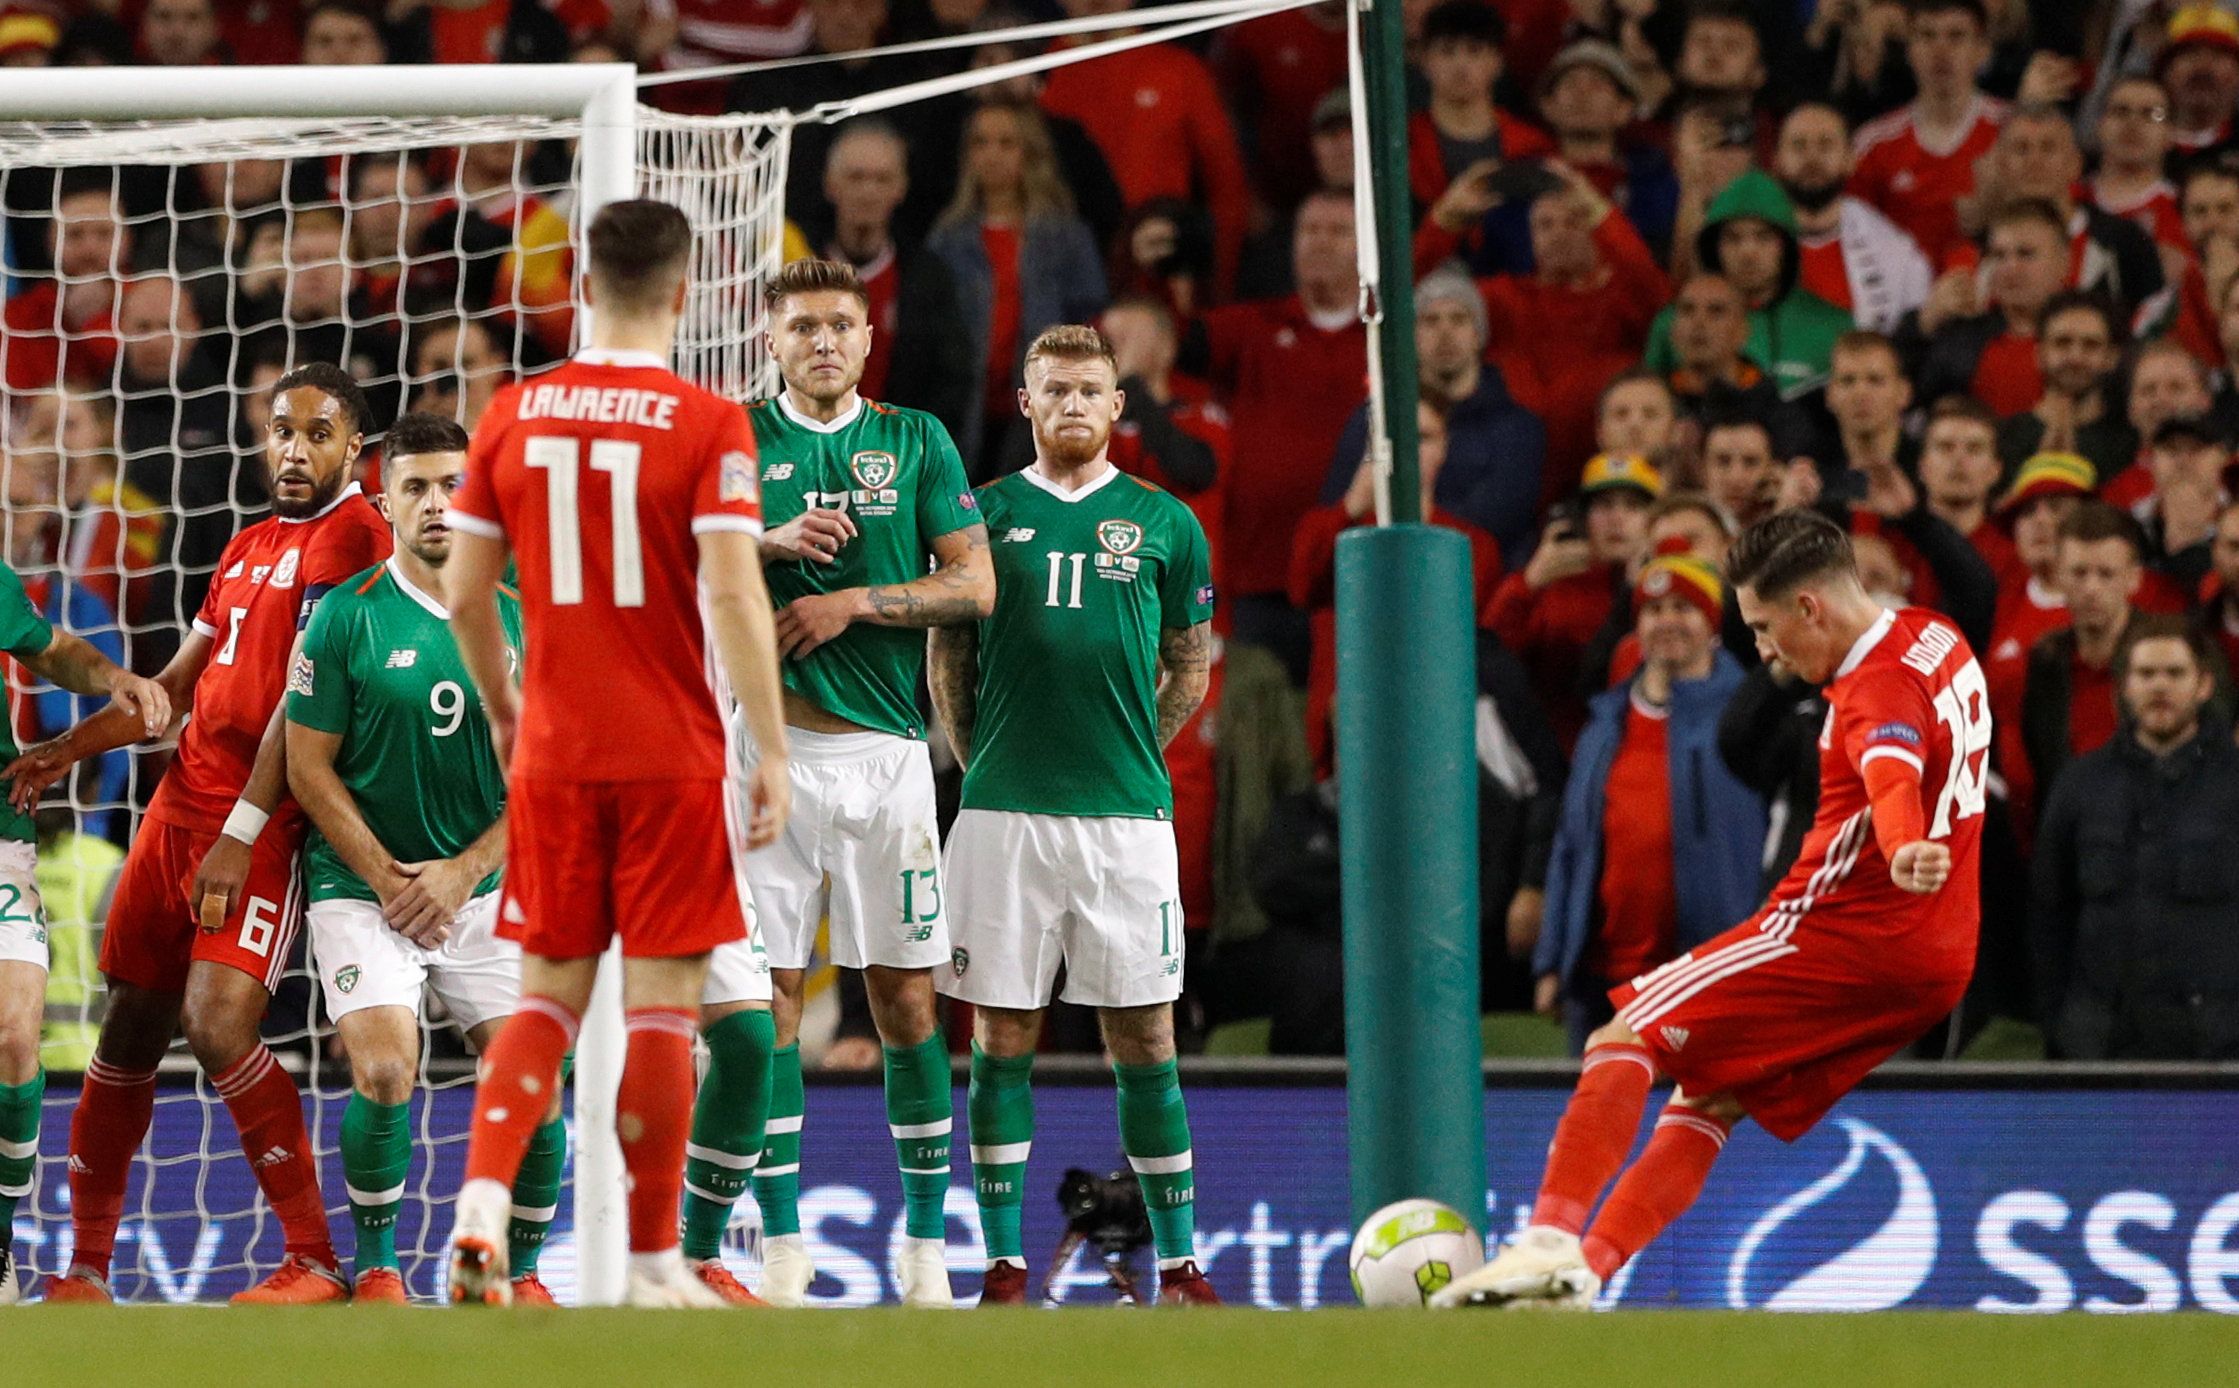 Soccer Football - UEFA Nations League - League B - Group 4 - Republic of Ireland v Wales - Aviva Stadium, Dublin, Republic of Ireland - October 16, 2018  Wales' Harry Wilson scores their first goal from a free kick  Action Images via Reuters/John Sibley